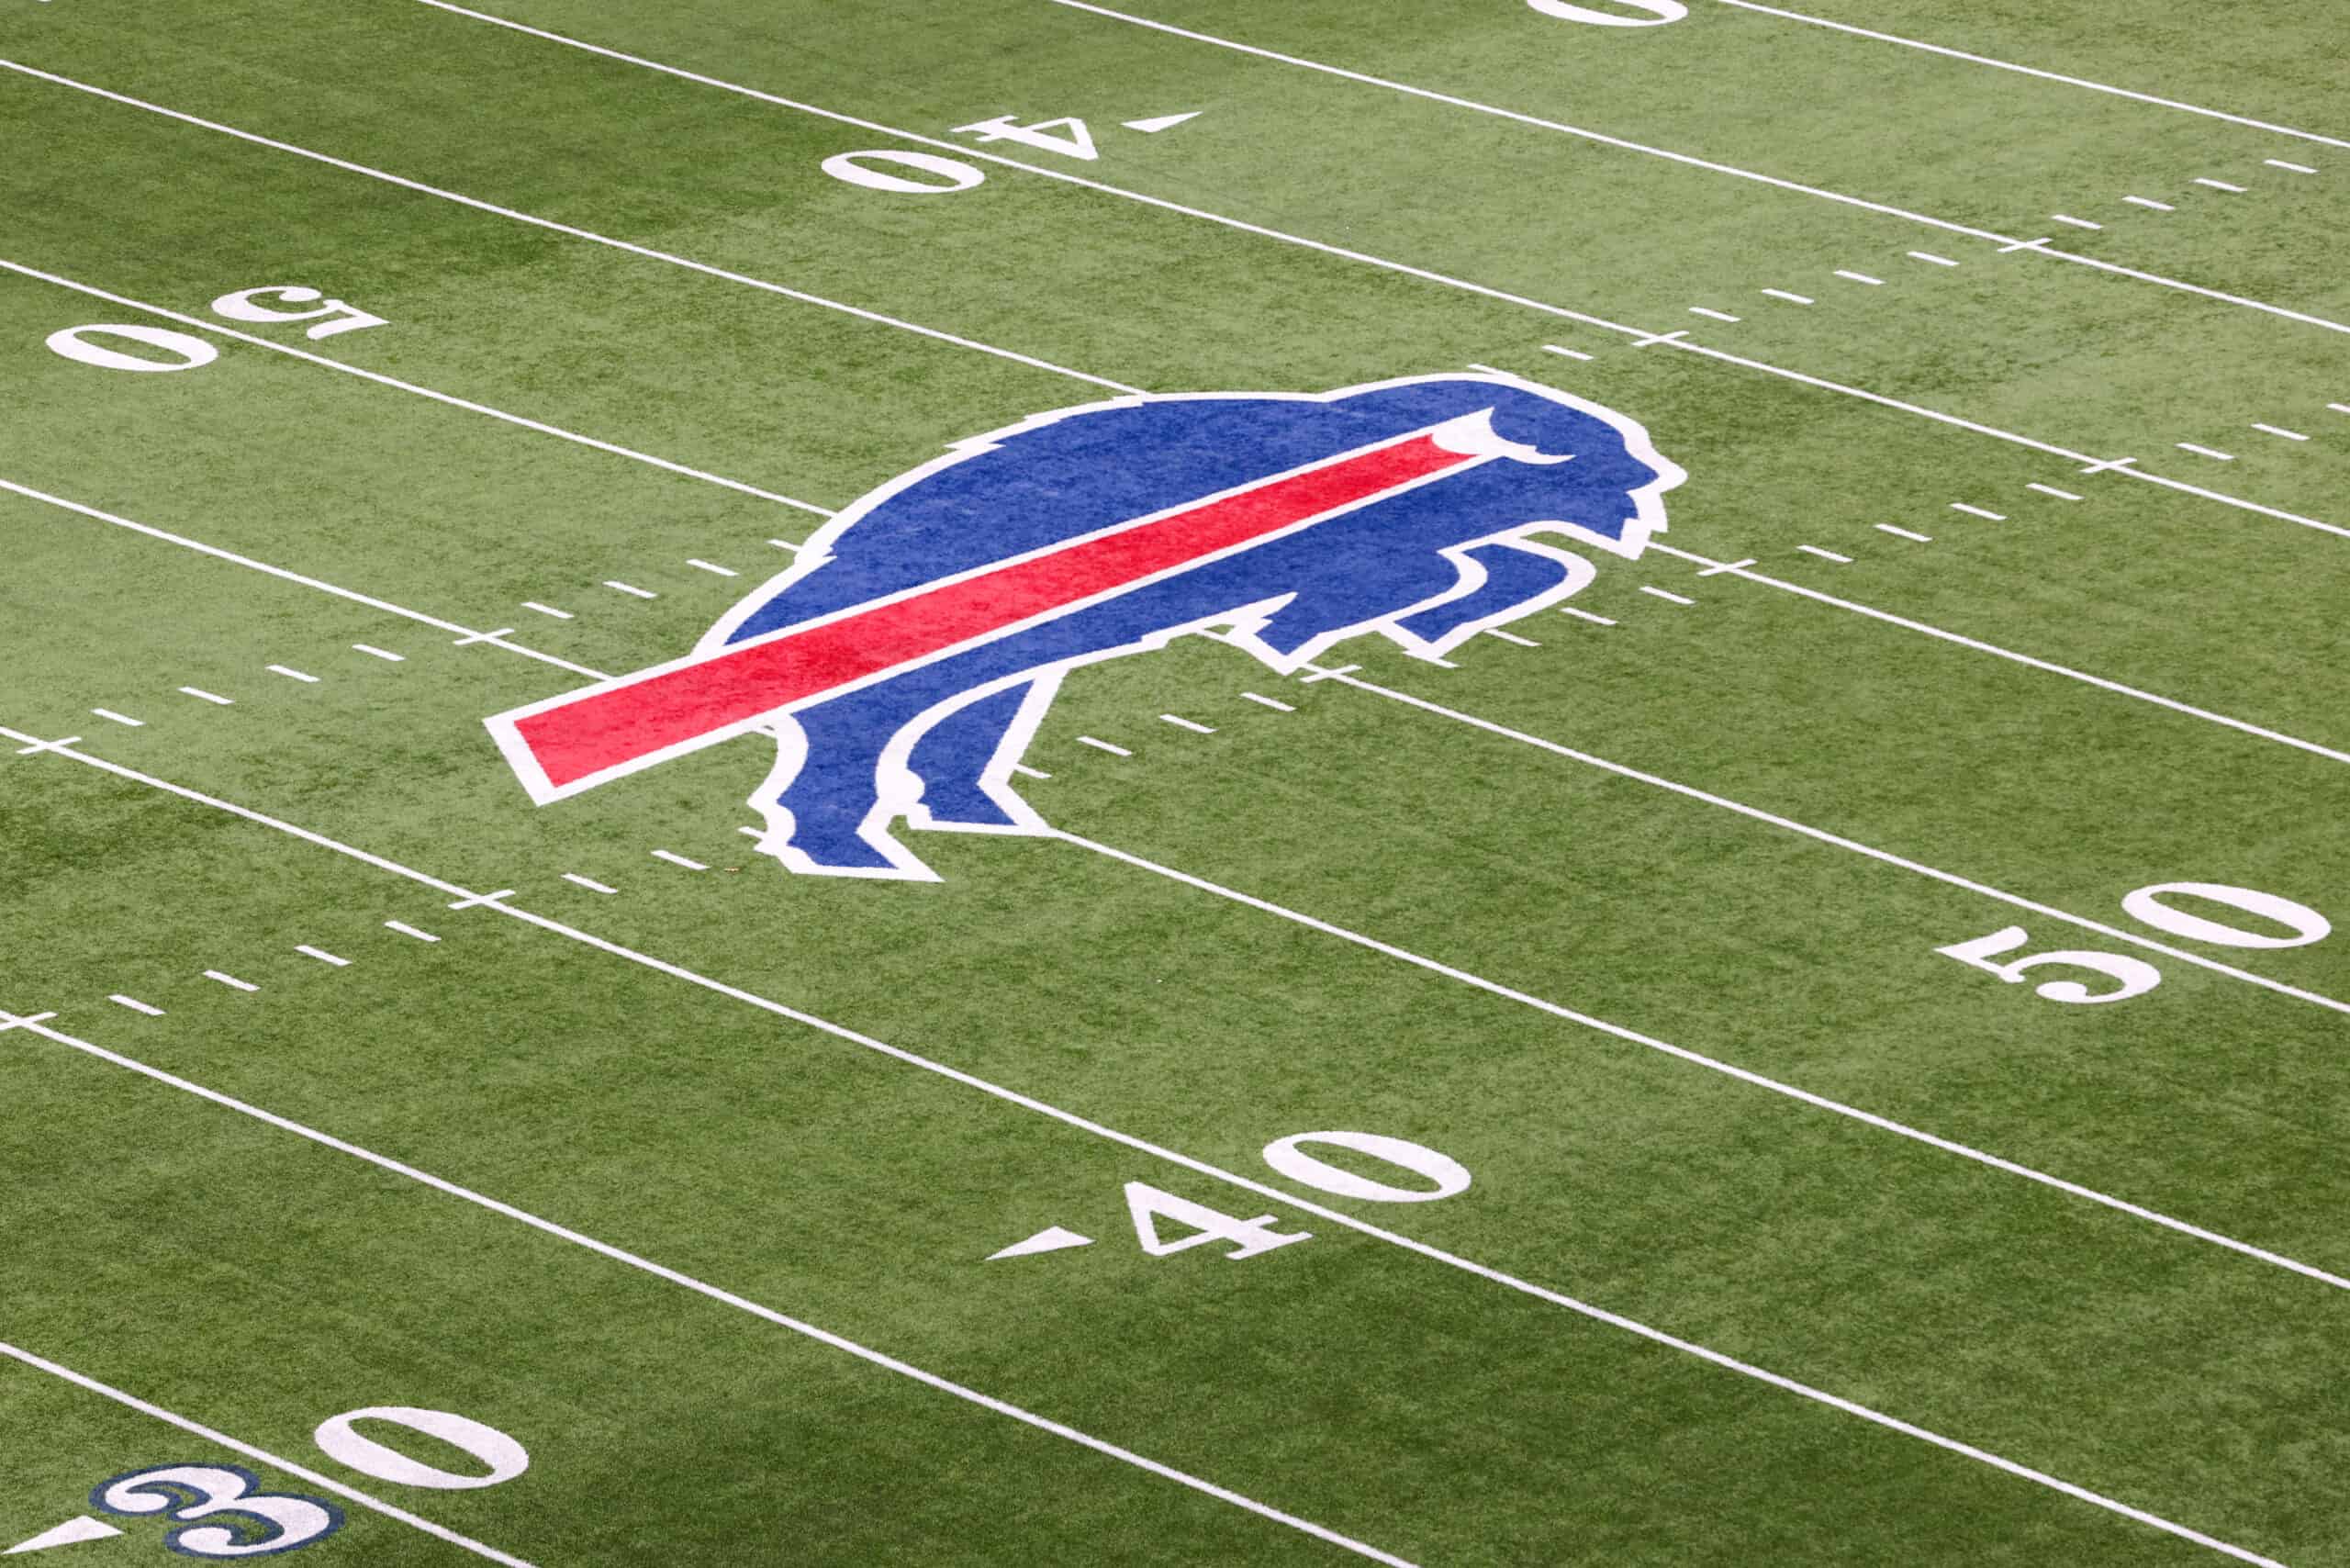 The Buffalo Bills logo is seen on the field prior to a game against the Cincinnati Bengals in the AFC Divisional Playoff game at Highmark Stadium on January 22, 2023 in Orchard Park, New York.